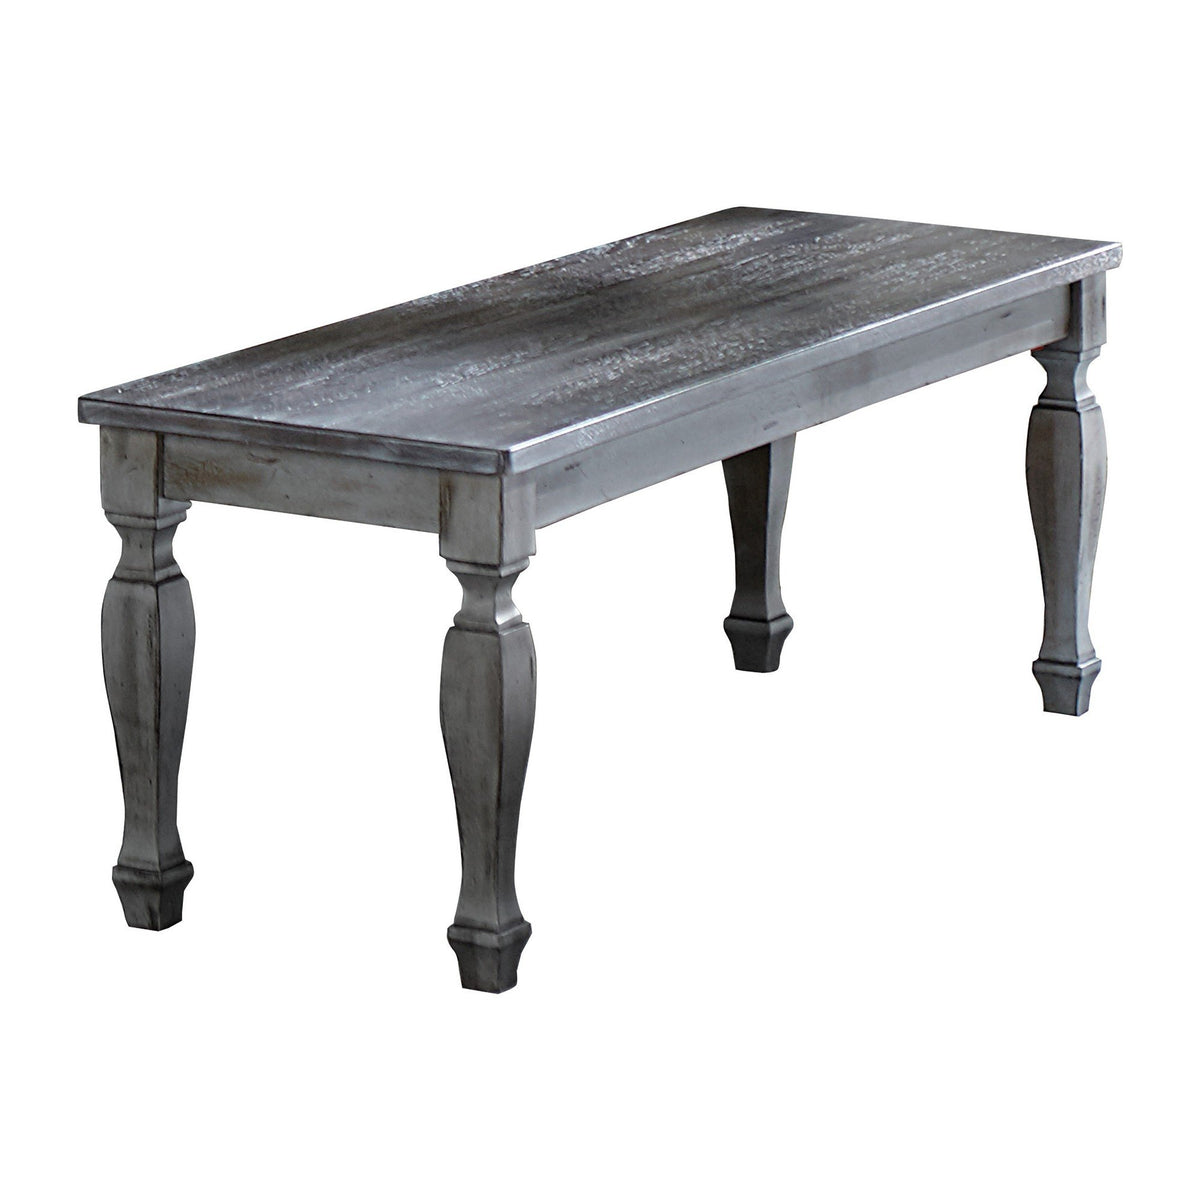 Rectangular Grained Wooden Bench with Square Baluster Legs, Gray - BM219913